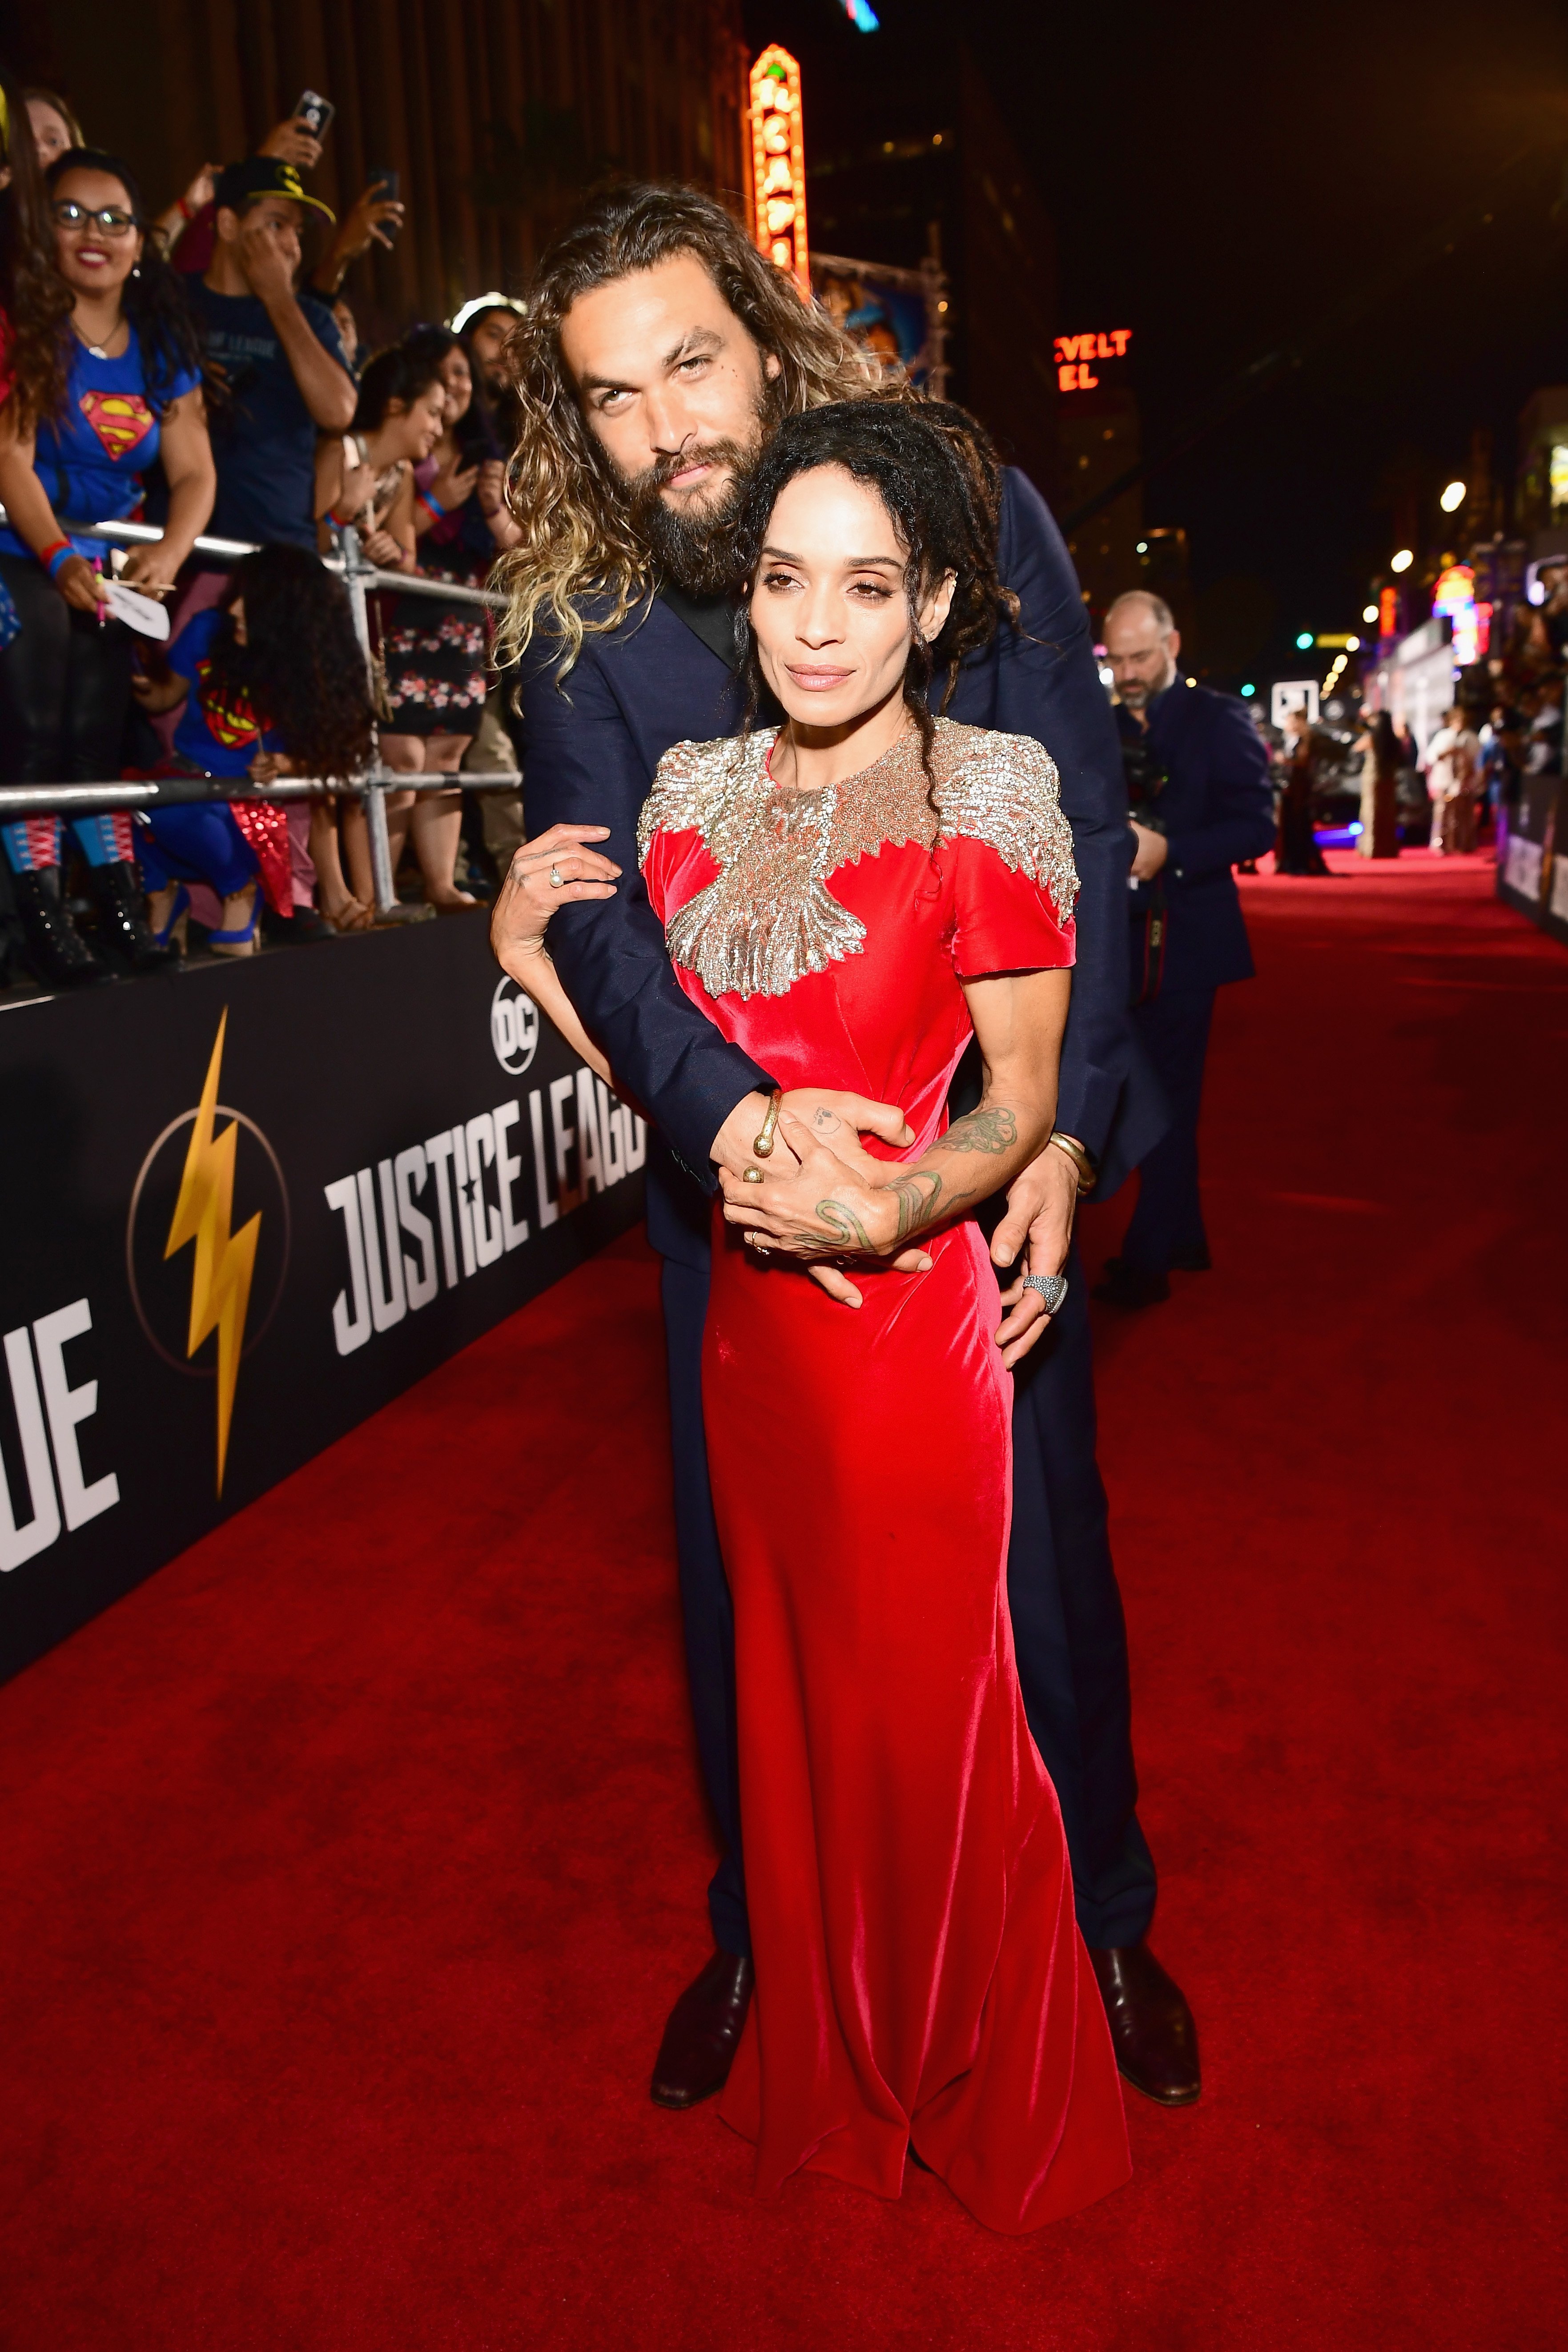 Jason Momoa and Lisa Bonet attend the premiere of Warner Bros. Pictures' "Justice League" at Dolby Theatre | Source: Getty Images